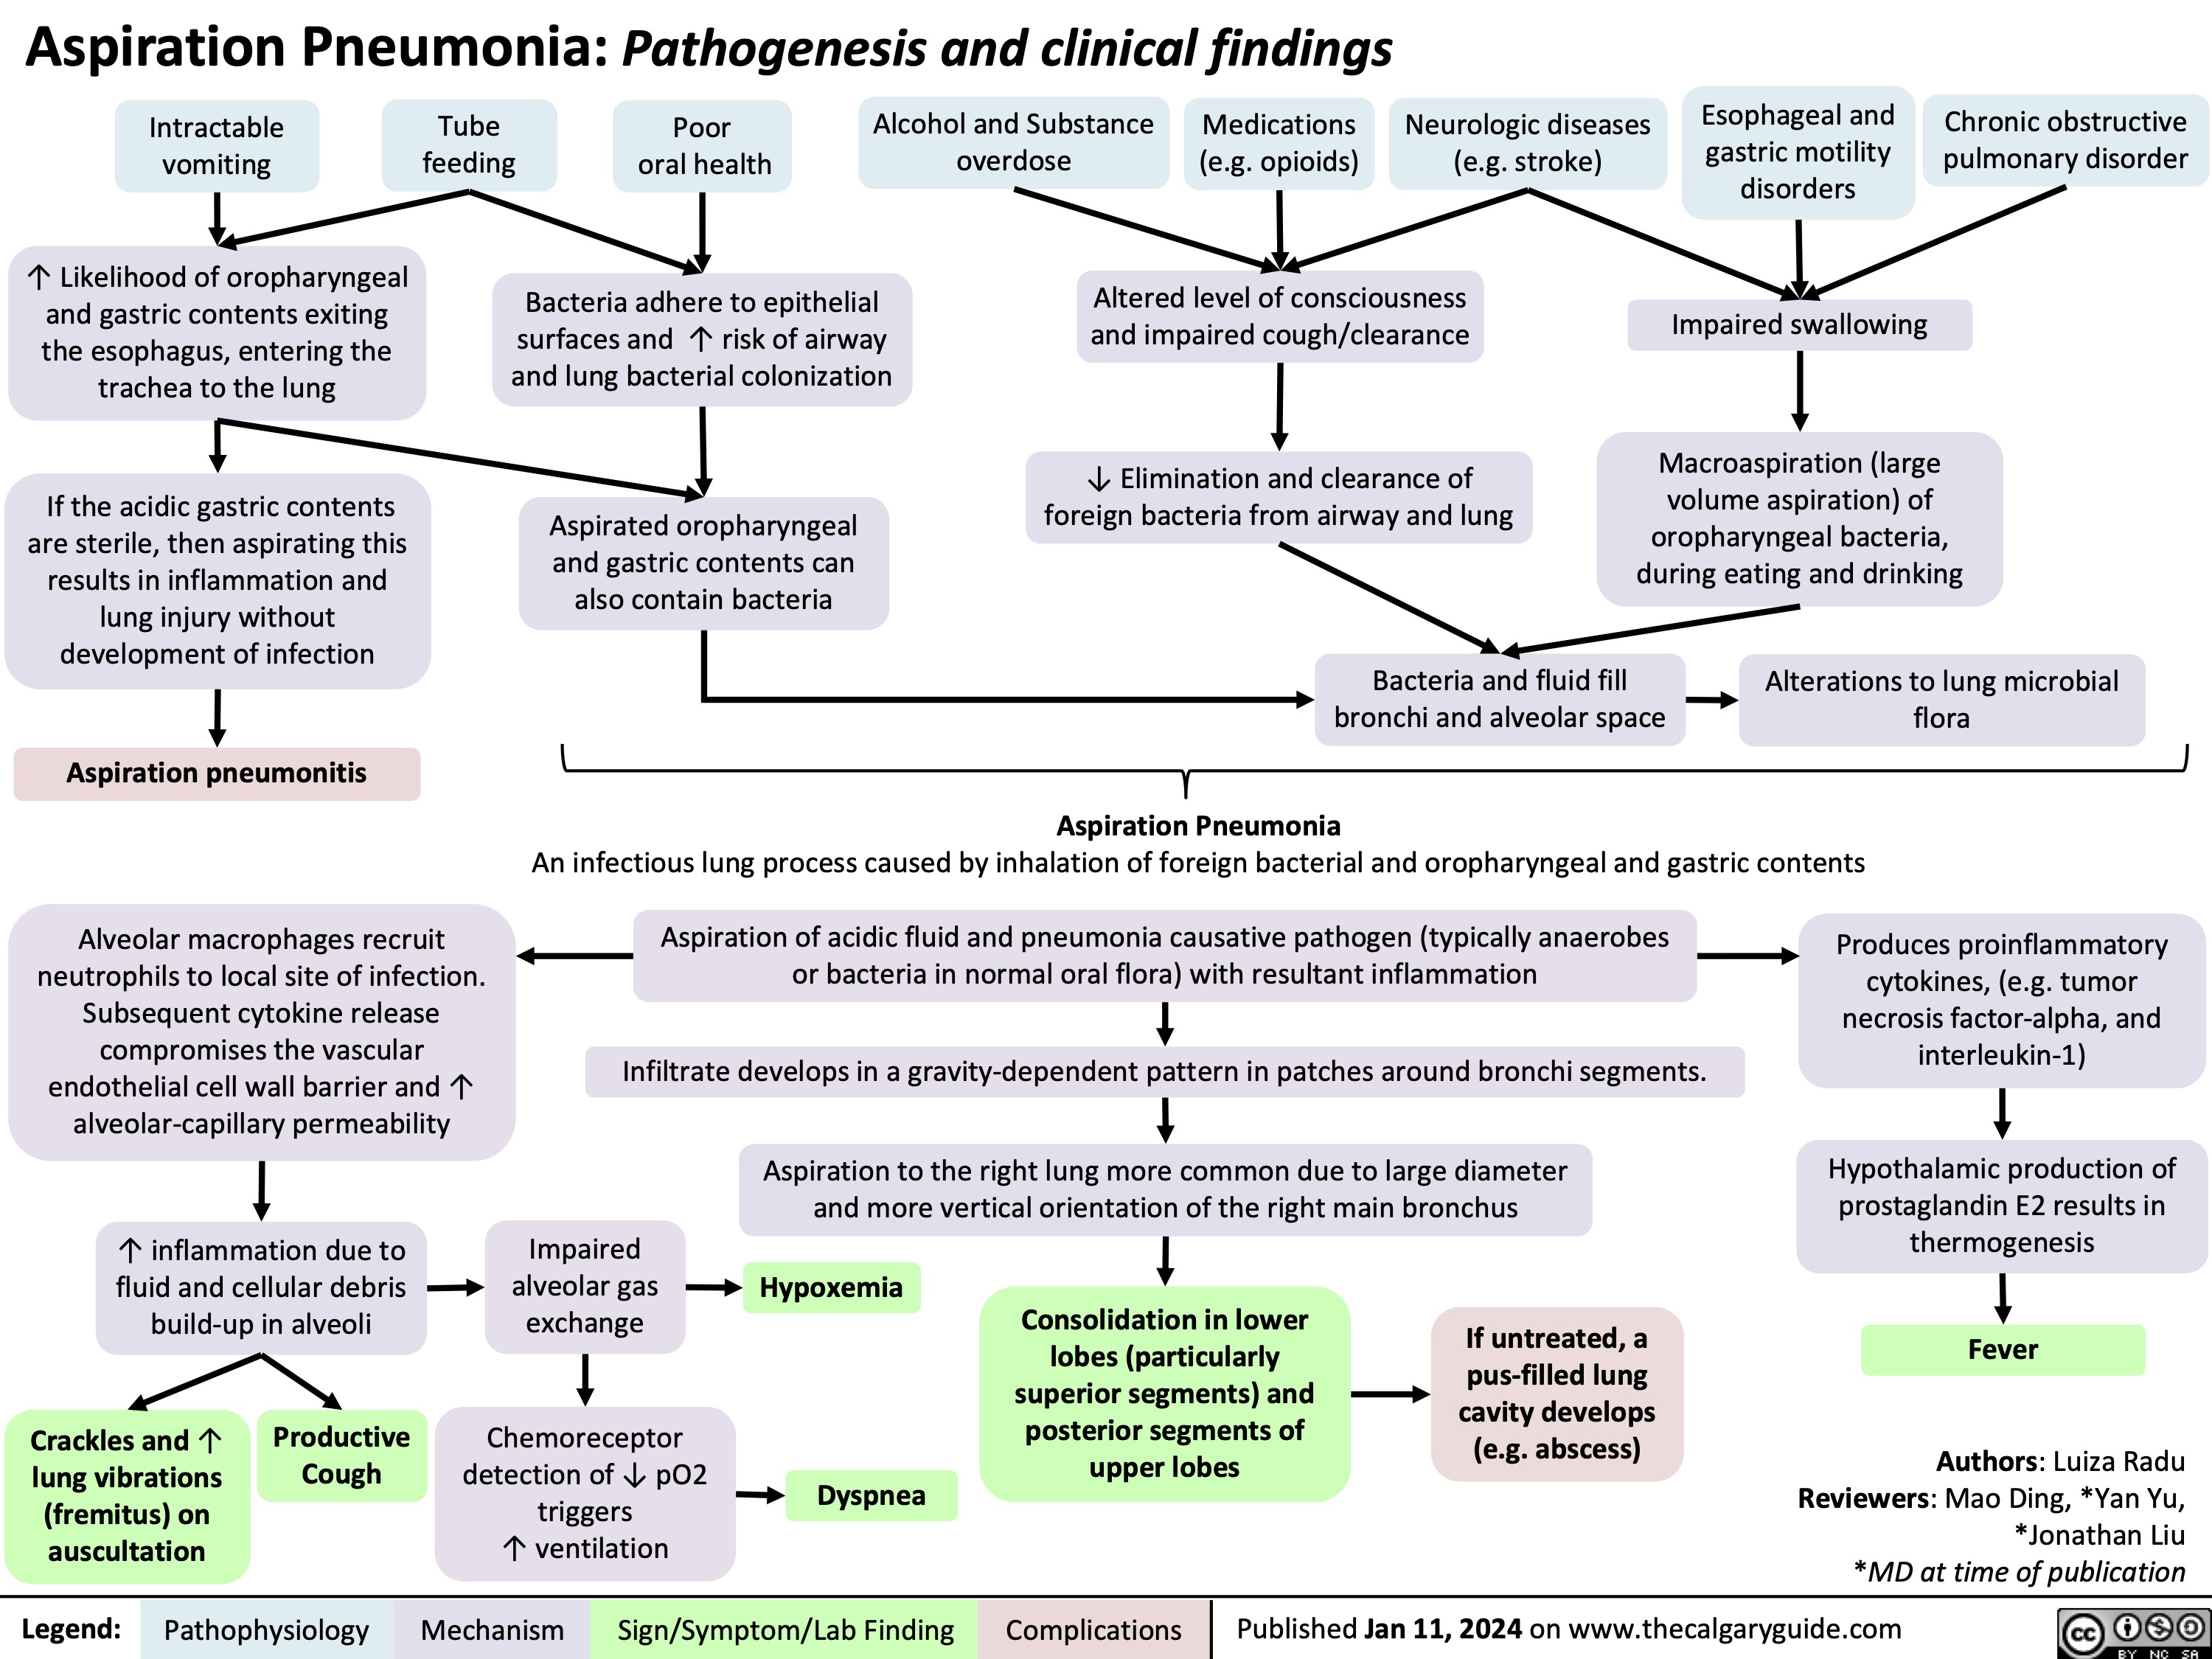 Aspiration Pneumonia: Pathogenesis and clinical findings
        Intractable vomiting
↑ Likelihood of oropharyngeal and gastric contents exiting the esophagus, entering the trachea to the lung
If the acidic gastric contents are sterile, then aspirating this results in inflammation and lung injury without development of infection
Aspiration pneumonitis
Alveolar macrophages recruit neutrophils to local site of infection. Subsequent cytokine release compromises the vascular endothelial cell wall barrier and ↑ alveolar-capillary permeability
↑ inflammation due to fluid and cellular debris build-up in alveoli
overdose
(e.g. opioids) (e.g. stroke)
Altered level of consciousness and impaired cough/clearance
Tube Poor Alcohol and Substance Medications Neurologic diseases
Esophageal and gastric motility disorders
Impaired swallowing
Chronic obstructive pulmonary disorder
feeding oral health
Bacteria adhere to epithelial surfaces and ↑ risk of airway and lung bacterial colonization
Aspirated oropharyngeal and gastric contents can also contain bacteria
↓ Elimination and clearance of foreign bacteria from airway and lung
Macroaspiration (large volume aspiration) of oropharyngeal bacteria, during eating and drinking
                    Bacteria and fluid fill bronchi and alveolar space
Aspiration Pneumonia
Alterations to lung microbial flora
  An infectious lung process caused by inhalation of foreign bacterial and oropharyngeal and gastric contents
   Aspiration of acidic fluid and pneumonia causative pathogen (typically anaerobes or bacteria in normal oral flora) with resultant inflammation
Infiltrate develops in a gravity-dependent pattern in patches around bronchi segments.
Produces proinflammatory cytokines, (e.g. tumor necrosis factor-alpha, and interleukin-1)
Hypothalamic production of prostaglandin E2 results in thermogenesis
Fever
Authors: Luiza Radu
Reviewers: Mao Ding, *Yan Yu, *Jonathan Liu *MD at time of publication
    Aspiration to the right lung more common due to large diameter and more vertical orientation of the right main bronchus
          Crackles and ↑ lung vibrations (fremitus) on auscultation
Productive Cough
Impaired alveolar gas exchange
Chemoreceptor detection of ↓ pO2 triggers
↑ ventilation
Hypoxemia
Dyspnea
Consolidation in lower lobes (particularly superior segments) and posterior segments of upper lobes
If untreated, a
pus-filled lung cavity develops (e.g. abscess)
  Legend:
 Pathophysiology
Mechanism
Sign/Symptom/Lab Finding
 Complications
 Published Jan 11, 2024 on www.thecalgaryguide.com
   